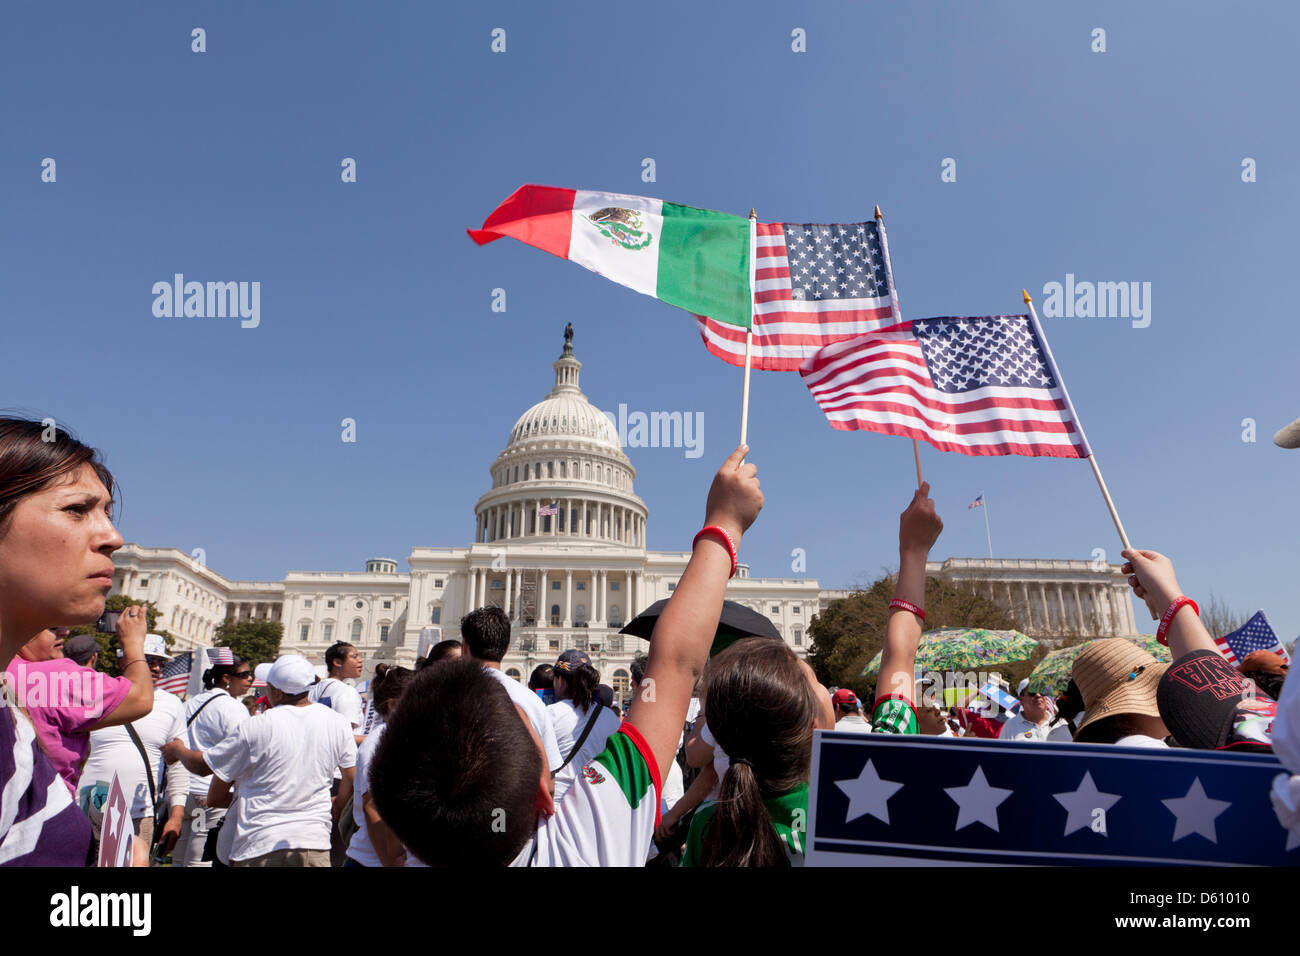 Large crowd waving Mexican and American flags at an immigration rally in Washington DC Stock Photo